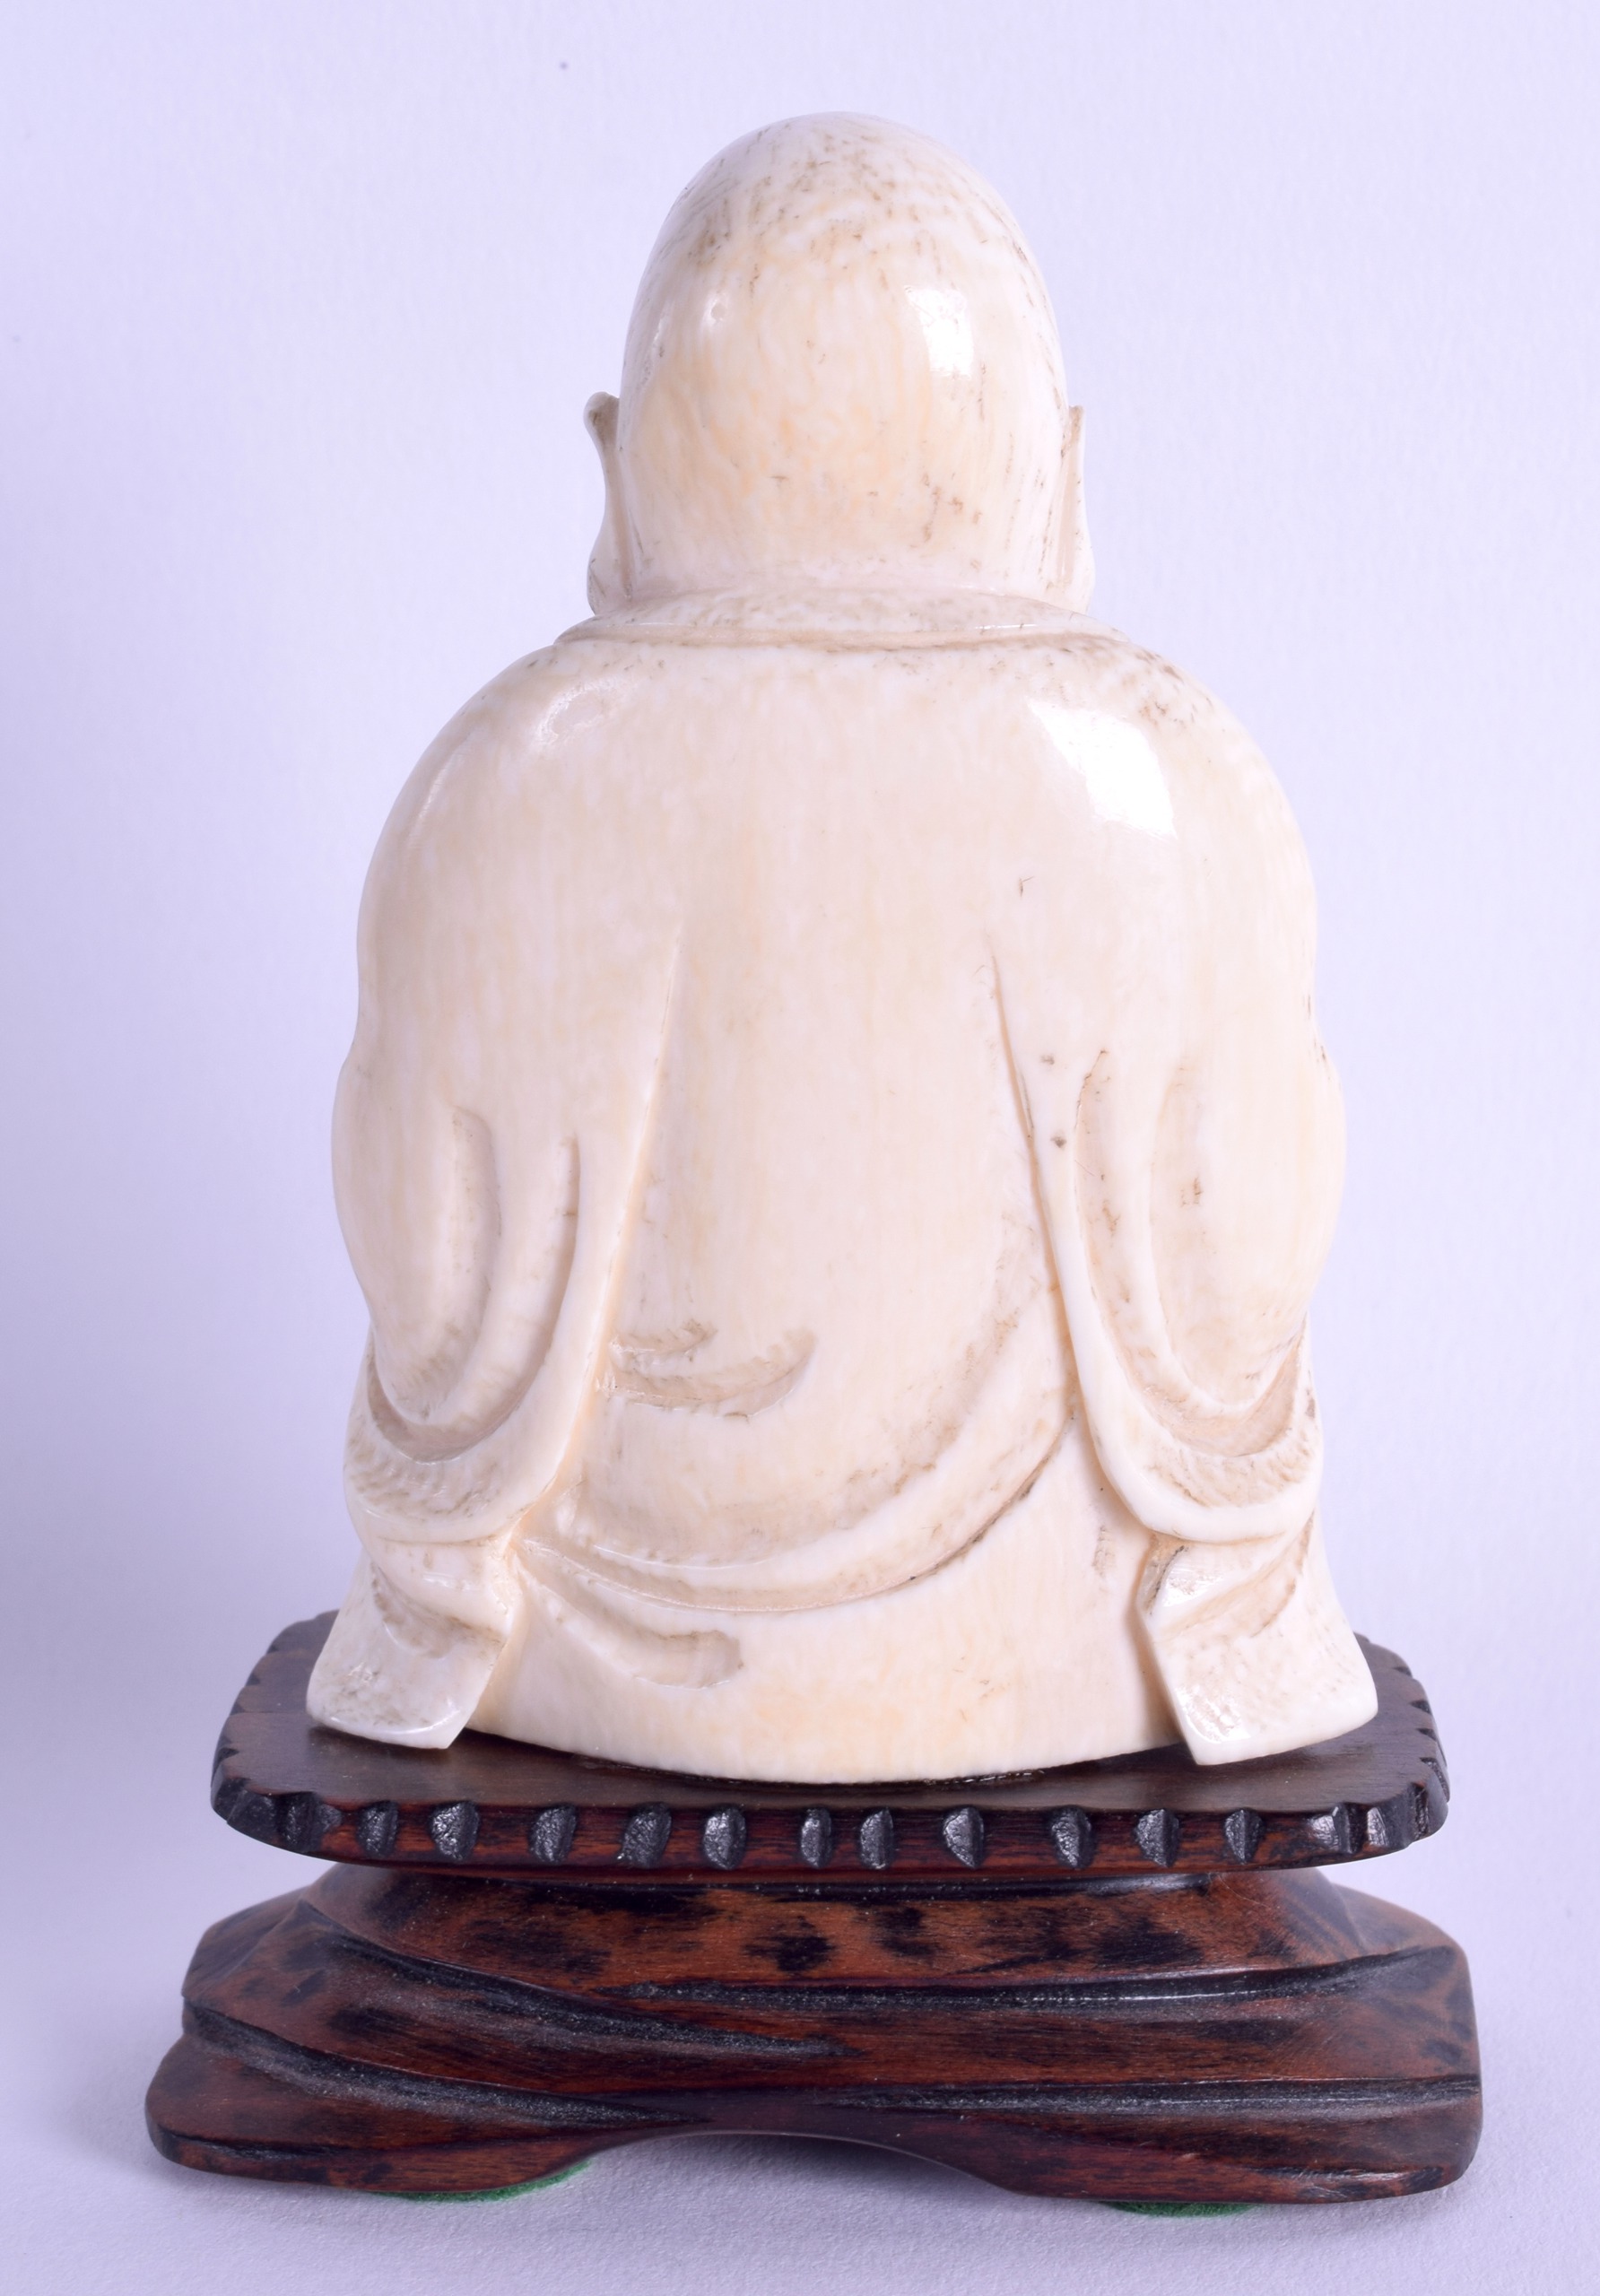 A LATE 19TH CENTURY CHINESE CARVED IVORY FIGURE OF A BUDDHA modelled in robes. Ivory 9 cm x 5.75 - Image 2 of 2